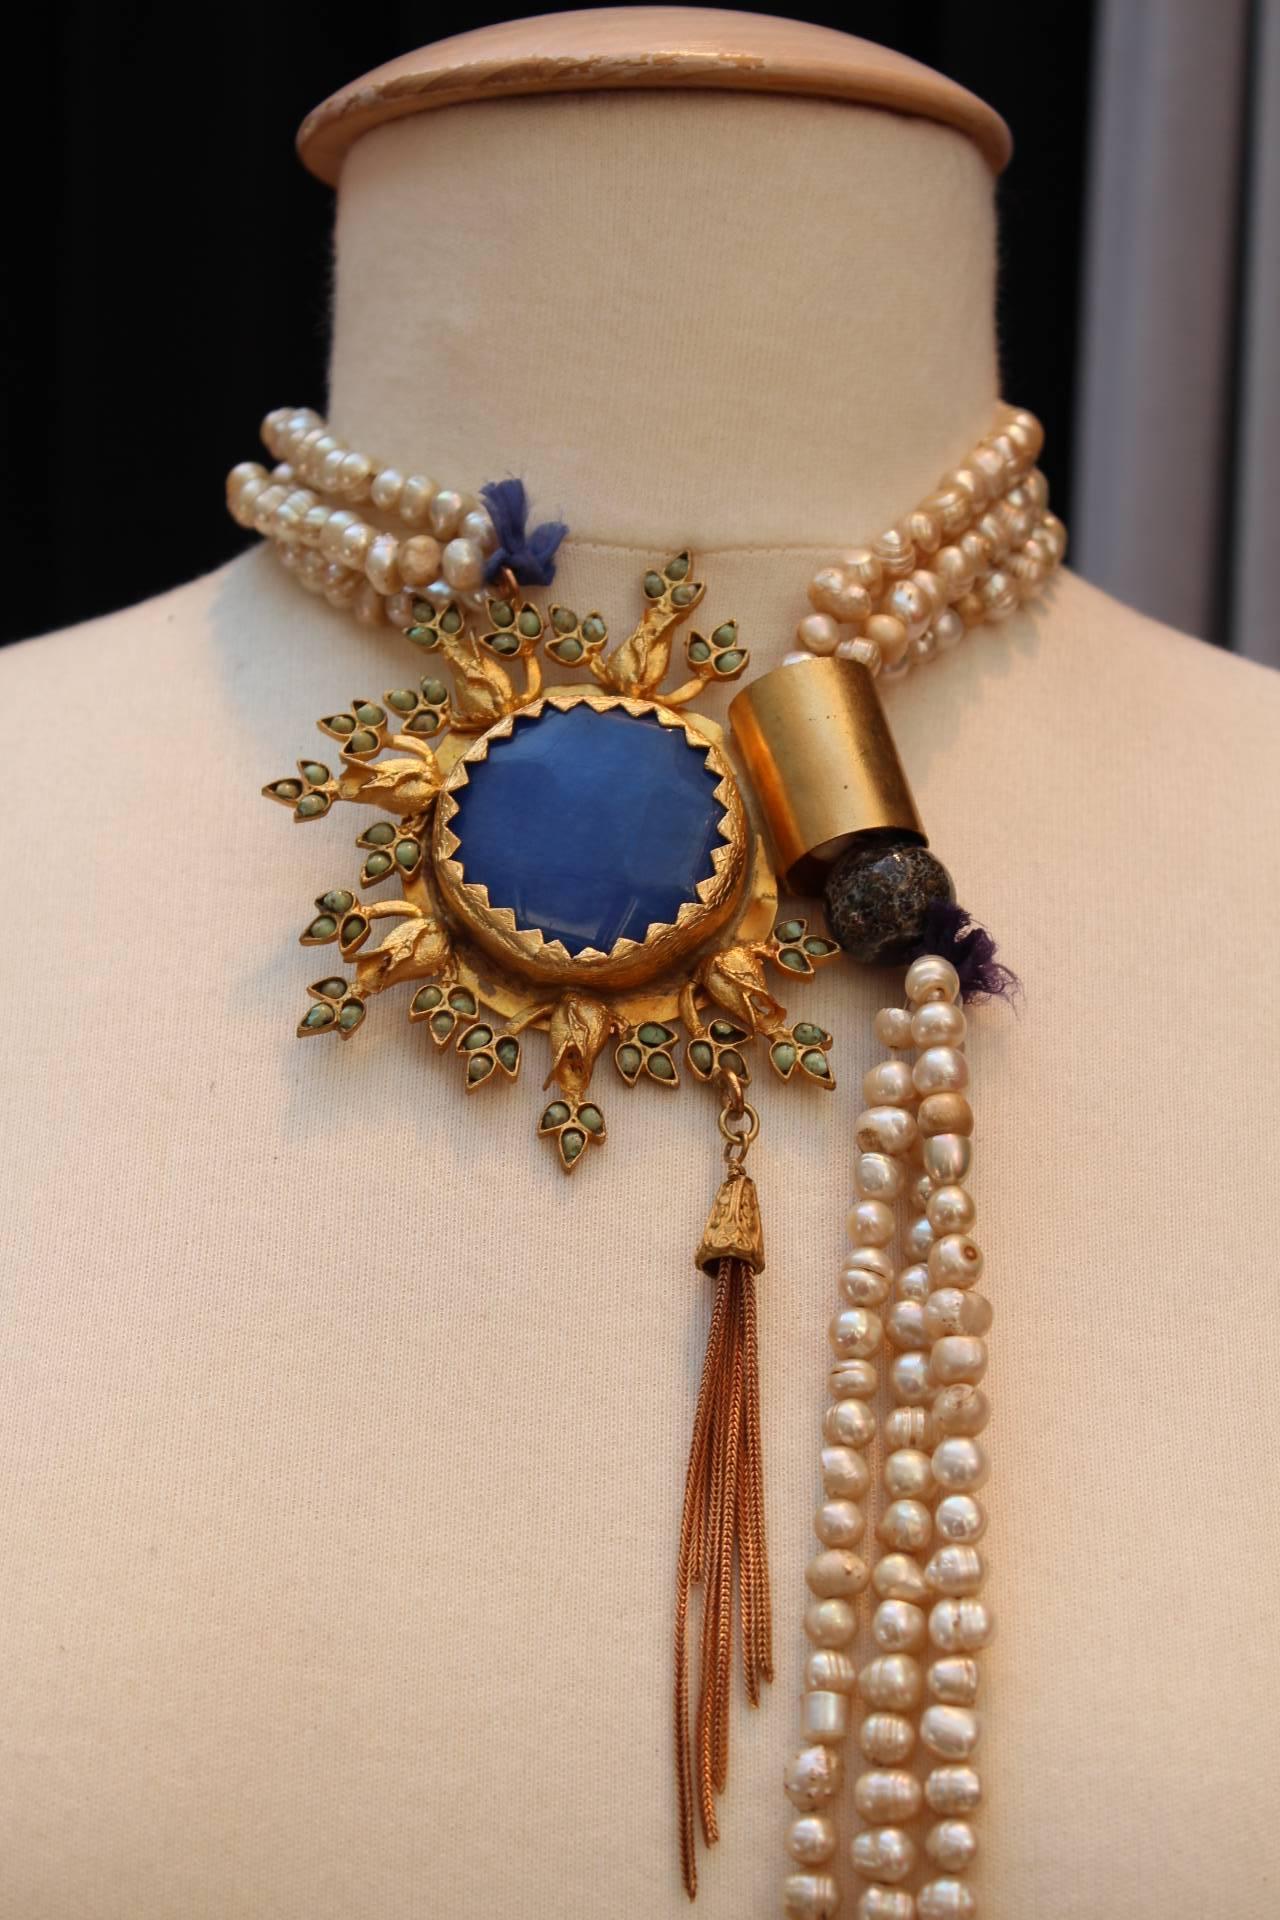 OSCAR DE LA RENTA RUNWAY Tie necklace consisting of pearly and pinkish baroque beads, with a removable medallion in the shape of a gilded metal sun, decorated with blue and green glass paste holding a goldtone chain tassel. 

Circa 1980.